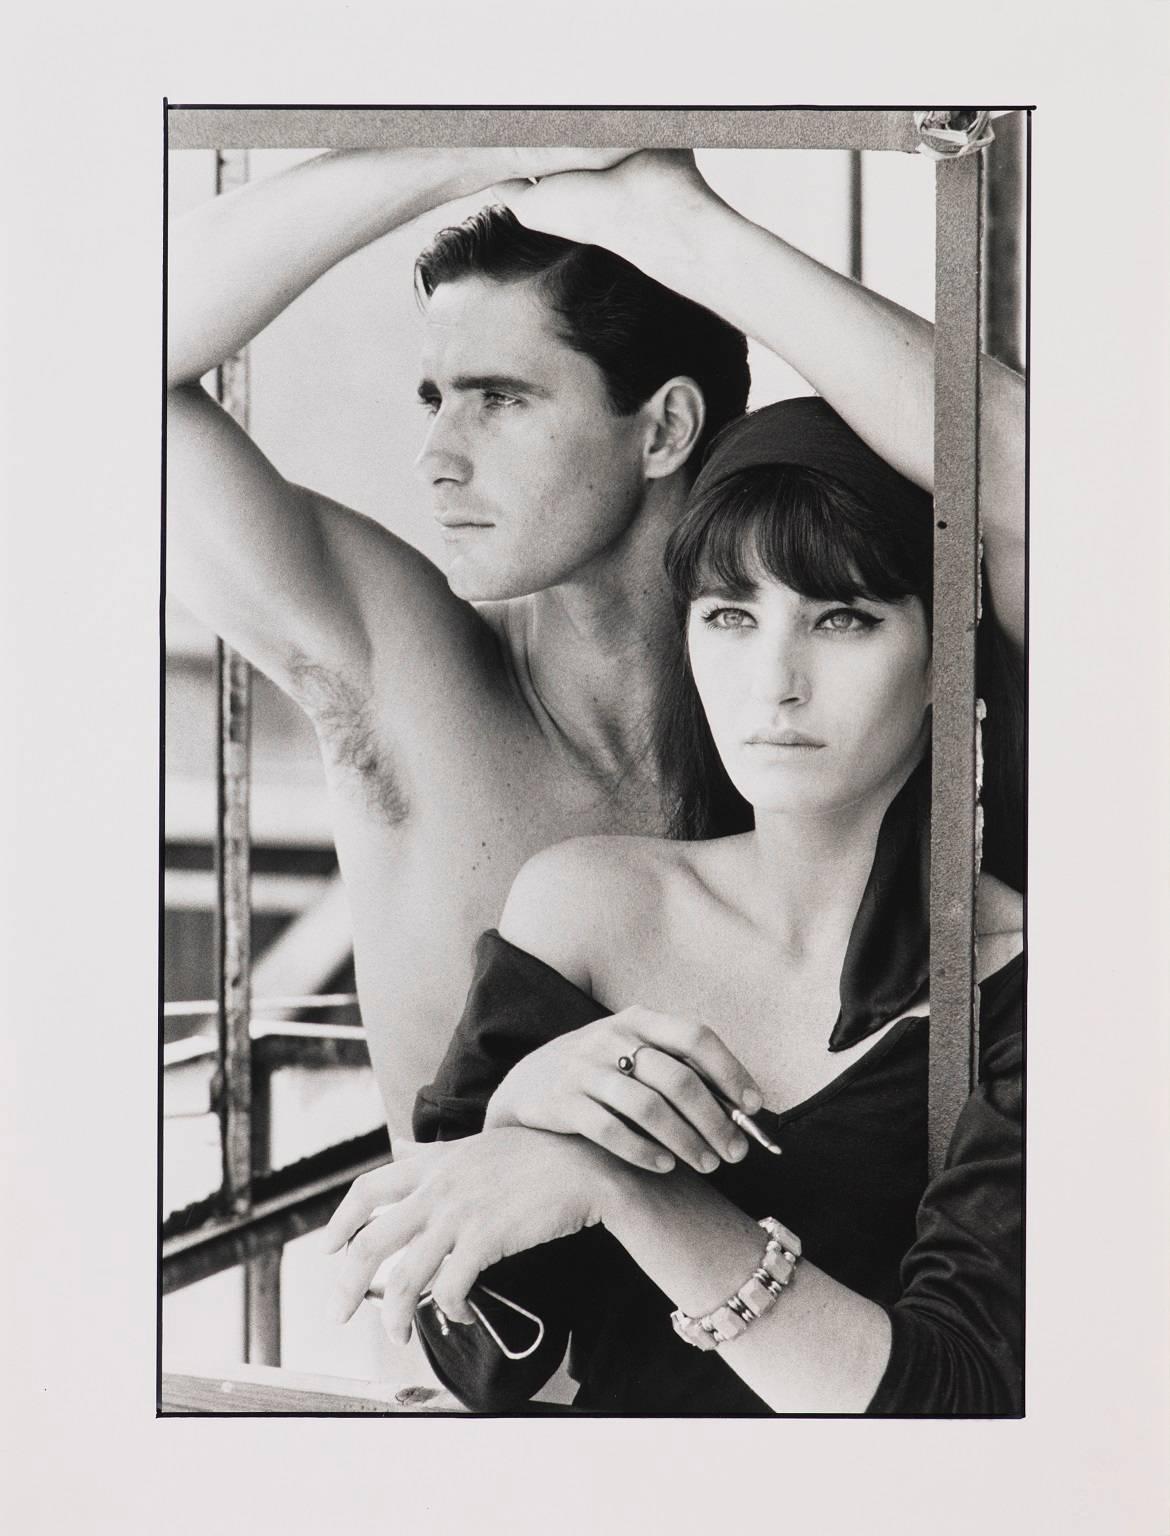 Dimensions:
Cm 34 x 22.3
Cm 38,3 x 49.2 with frame
Signed (verso)
Fashion Photography

Herb Ritts was born in Los Angeles in 1952. In 1974 he obtained a degree in economics at the New York’s Bard College and, in the same period, he began to approach